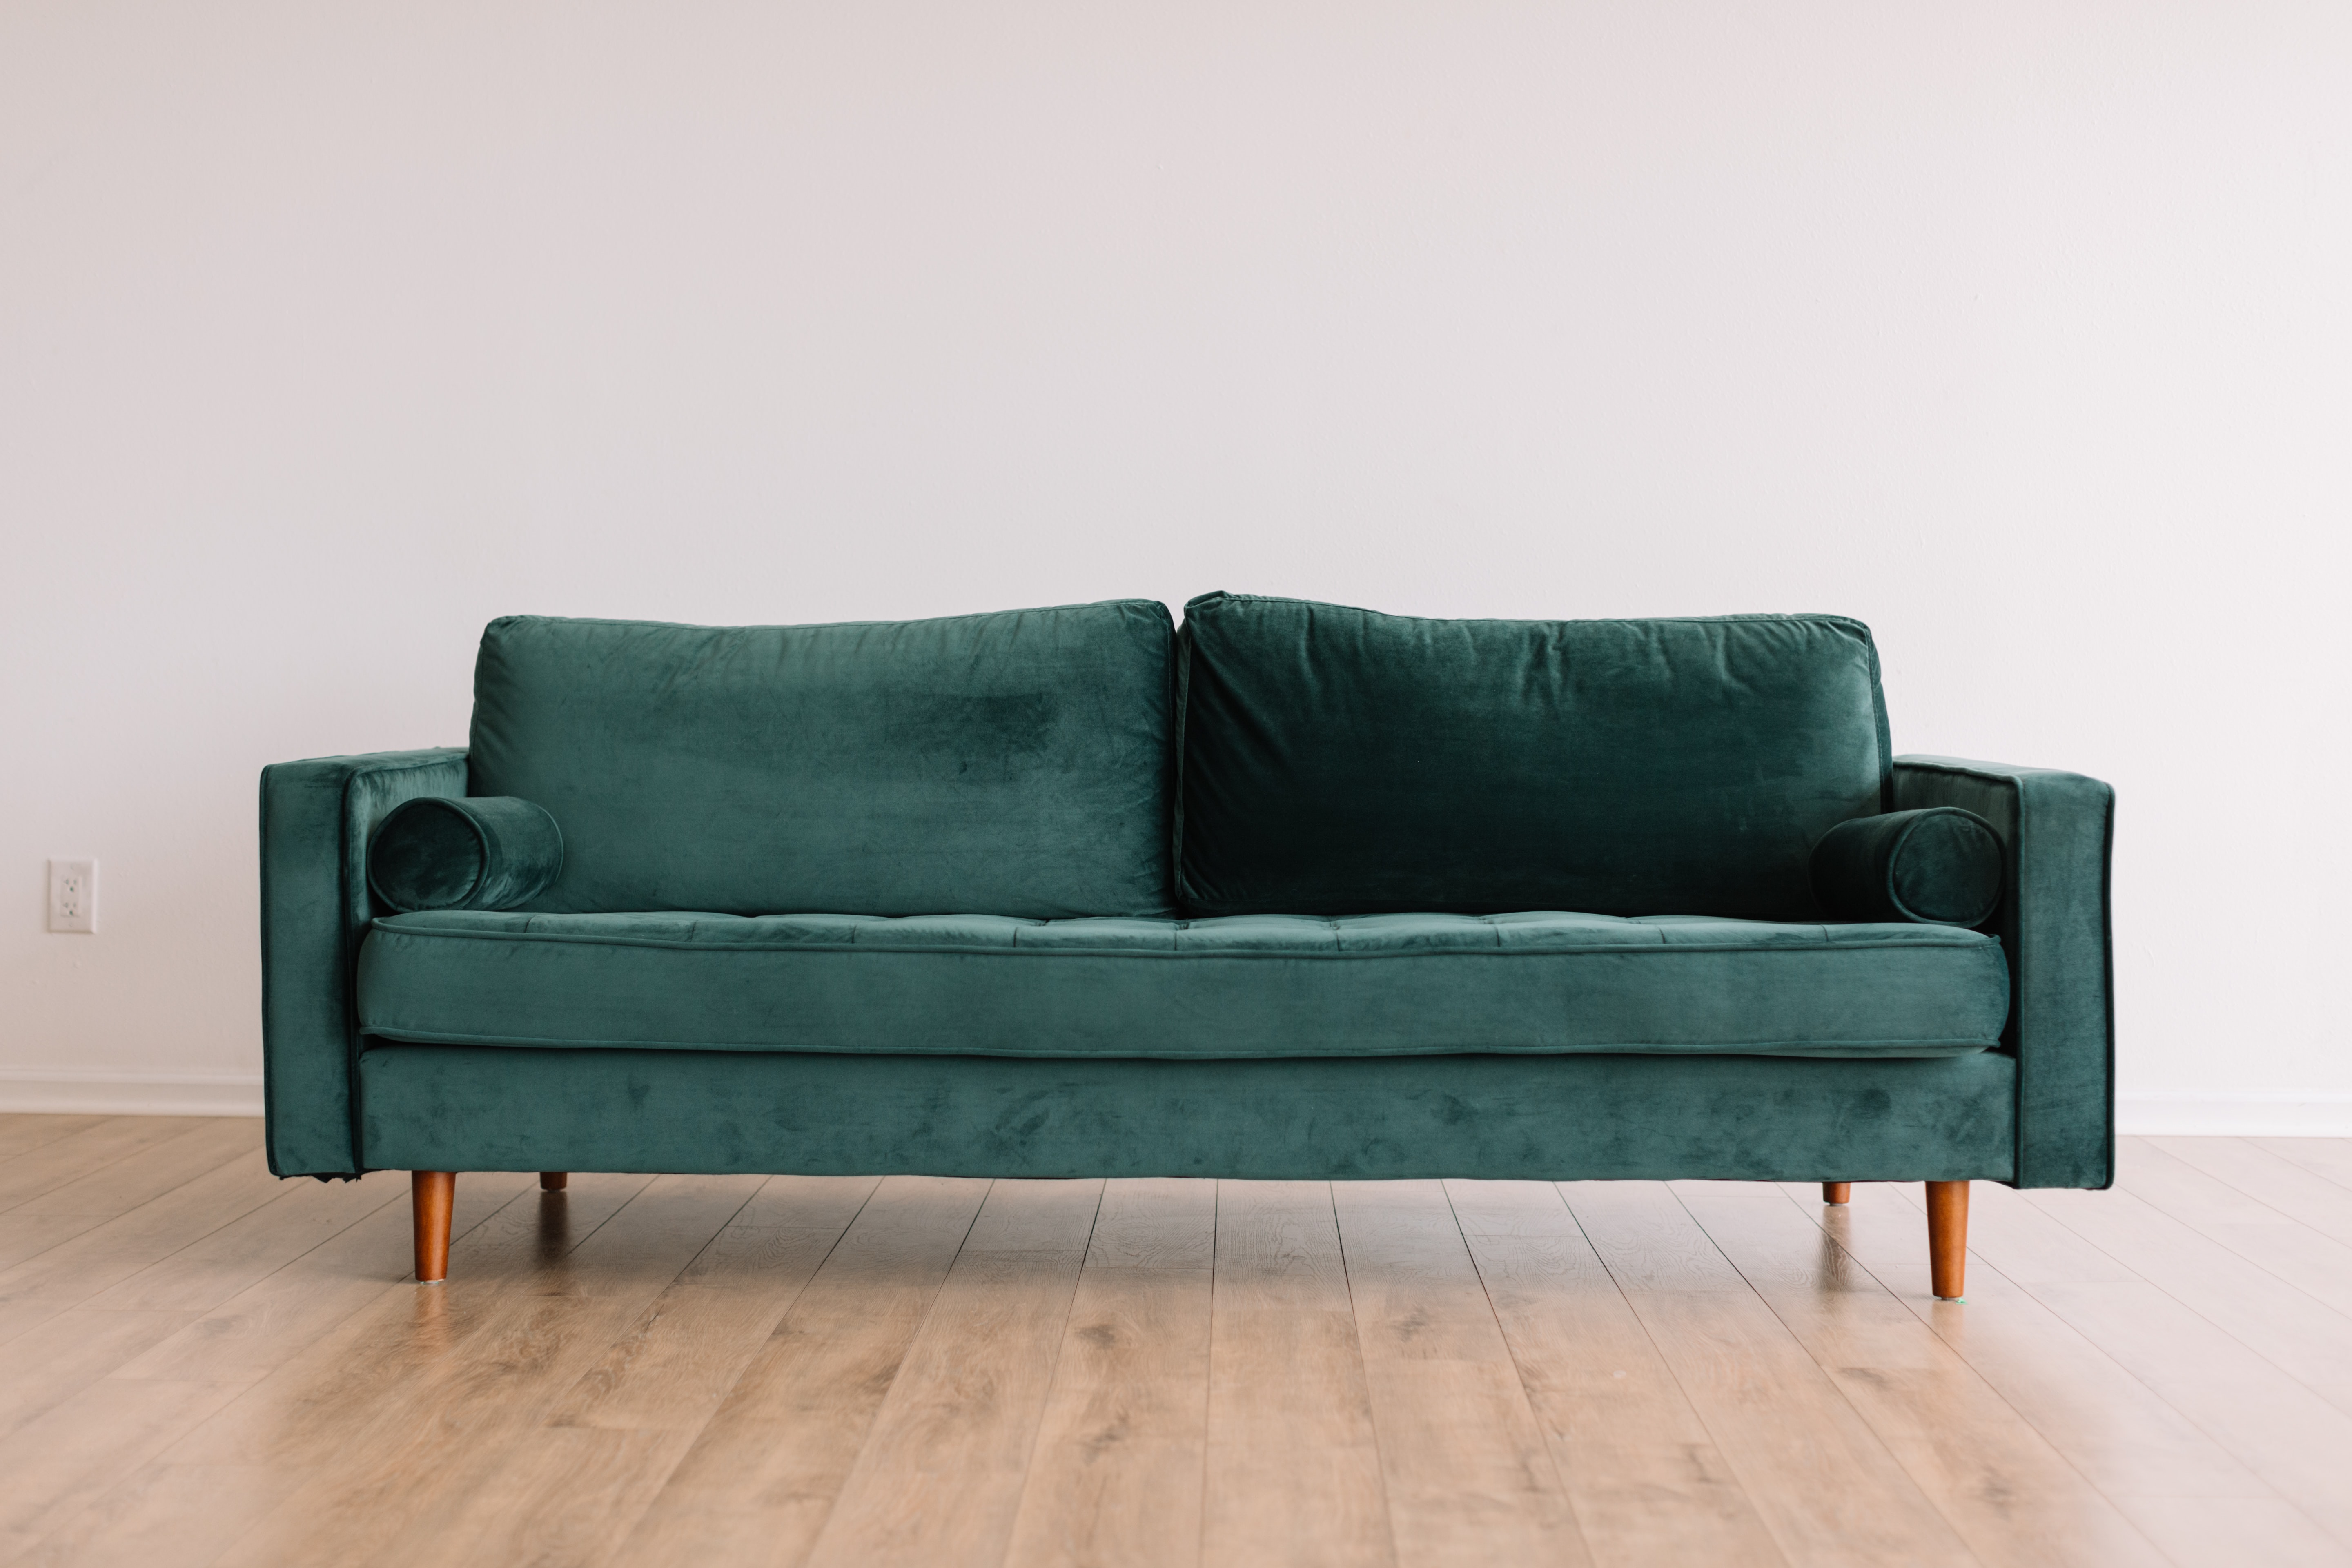 10 details for buying a sofa